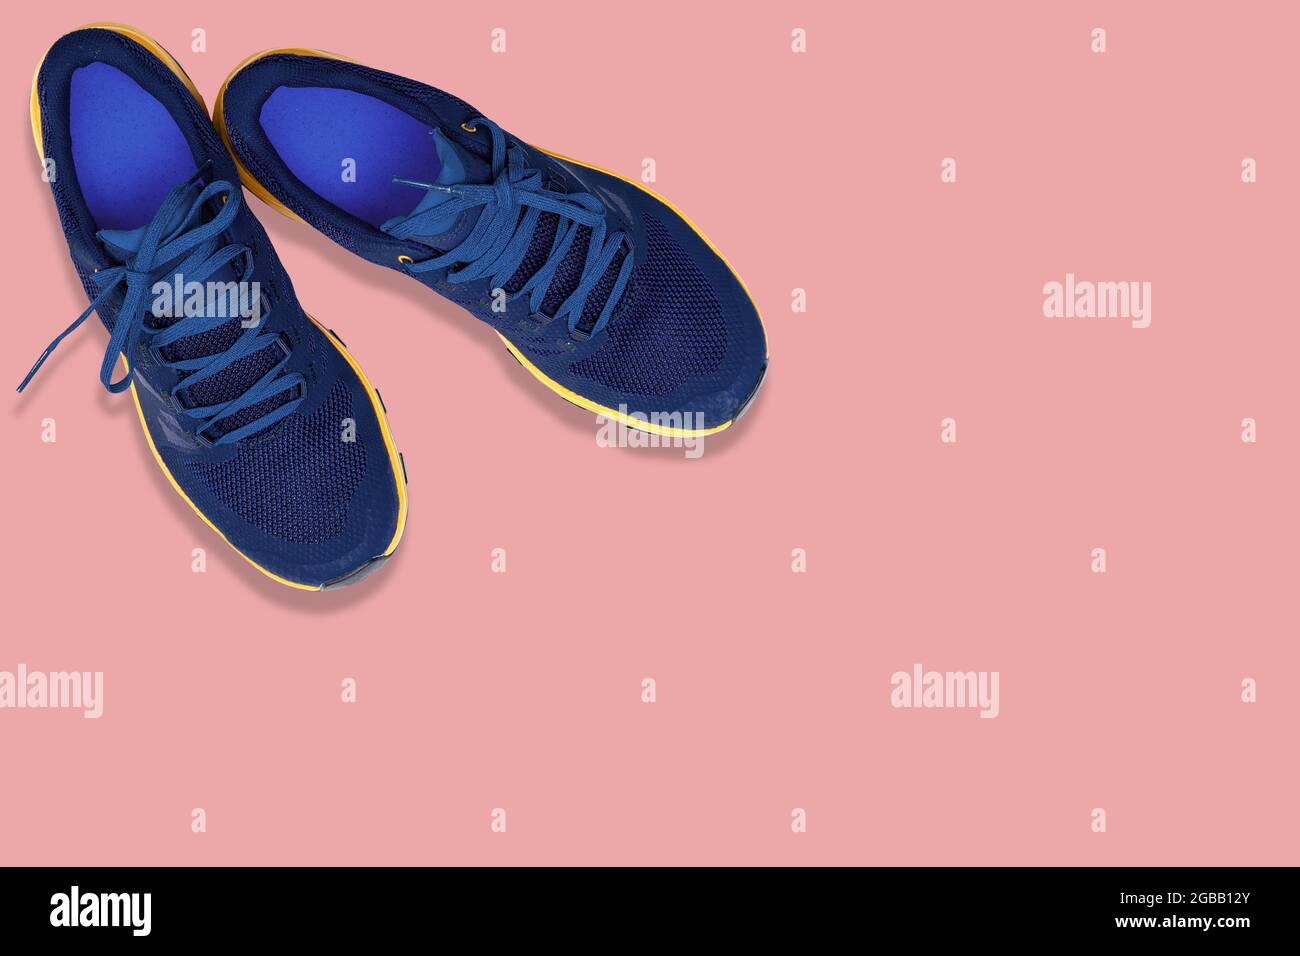 blue sneakers on a  pink background Stock Photo